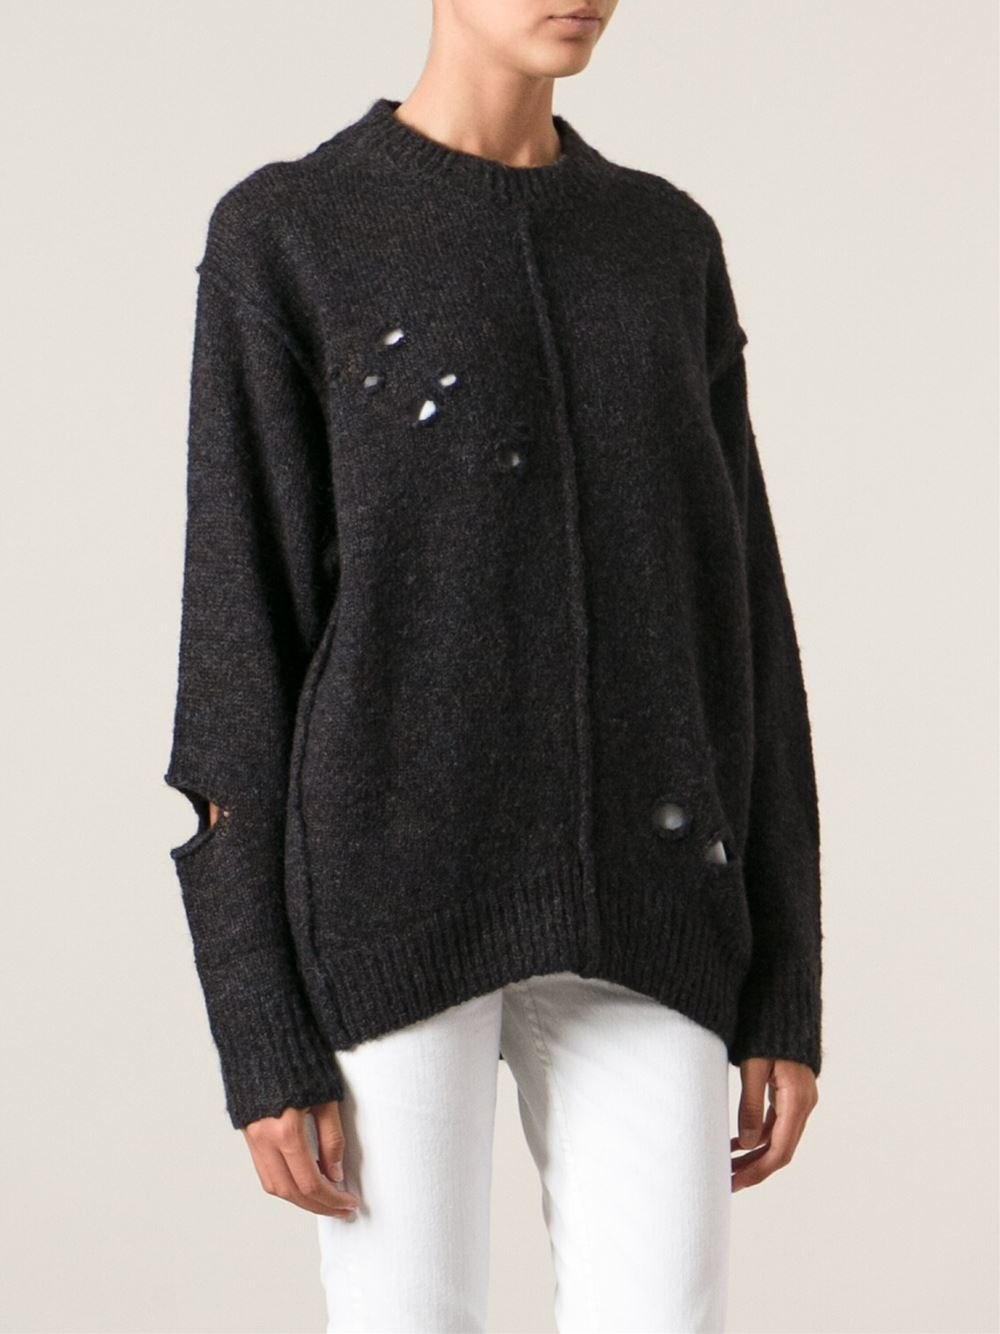 Étoile Isabel Marant Distressed Knit Sweater in Grey (Gray) - Lyst